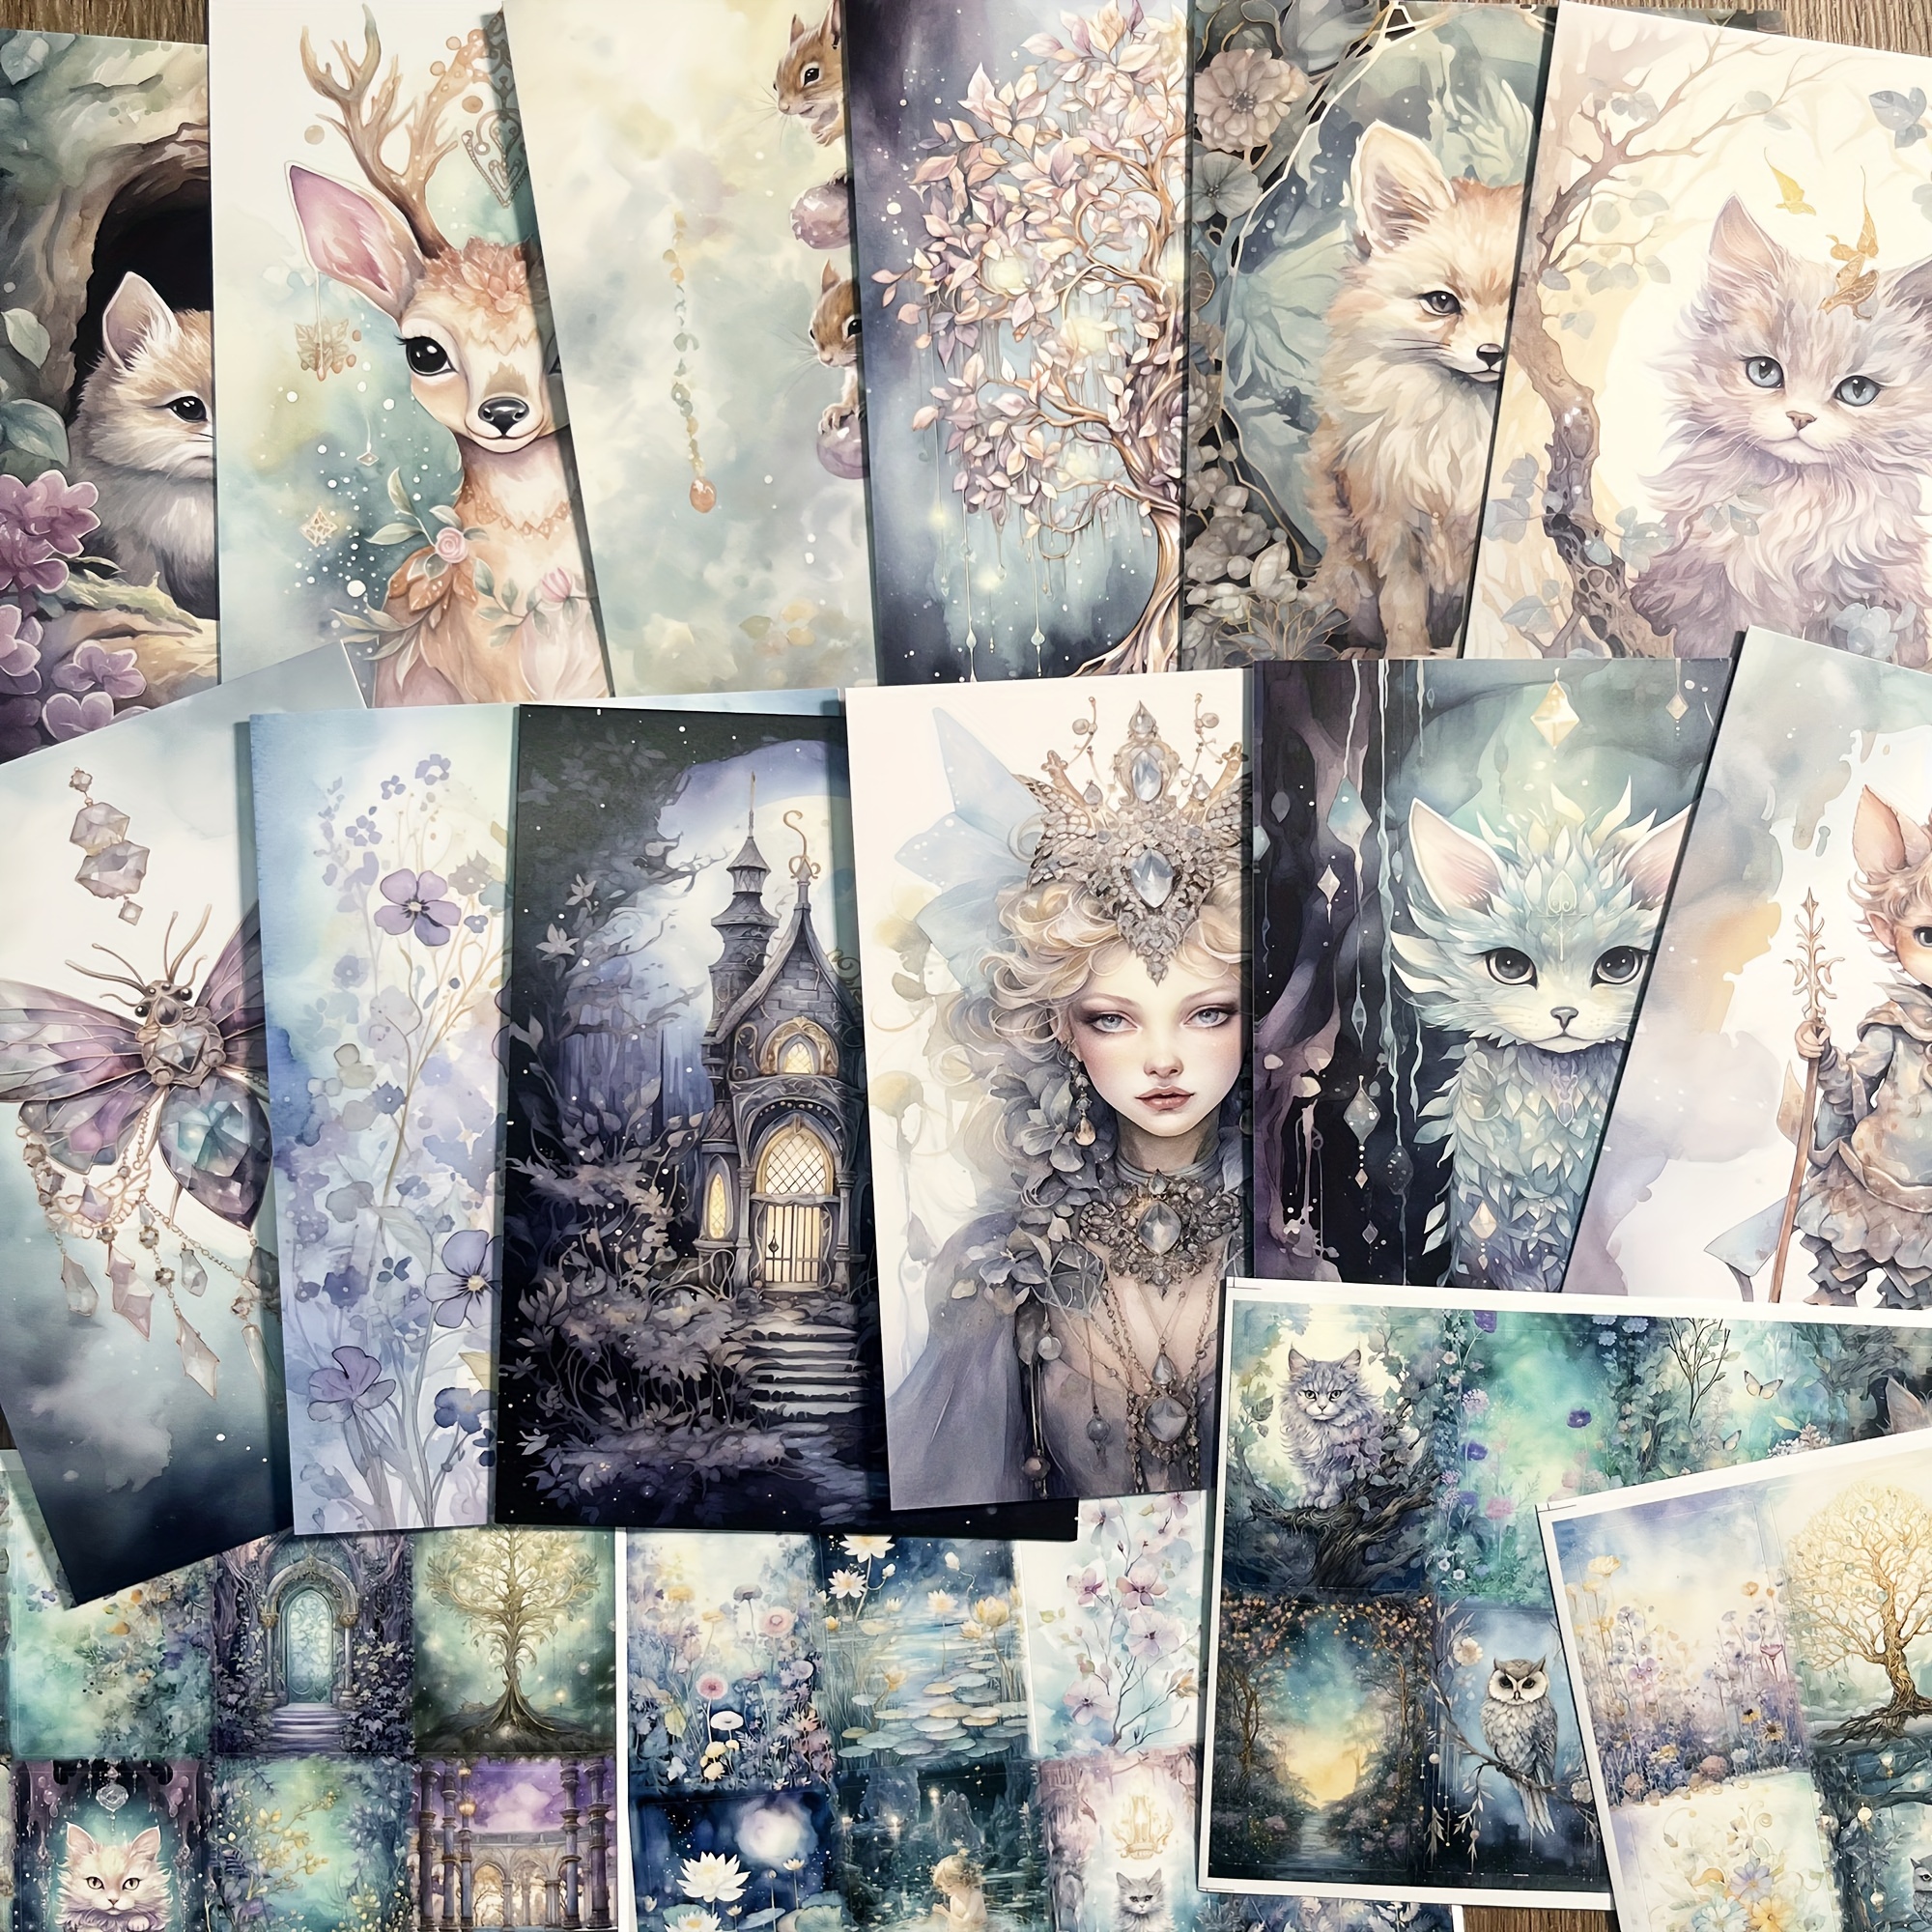 

44pcs(12cards+32stickers) Fantasy Cat Theme Diy Greeting Cards Set, Perfect For Bullet Journals,arts Crafts,scrapbooking Supplies,junk Journal Kits,greeting Card Decoration,diy Crafts